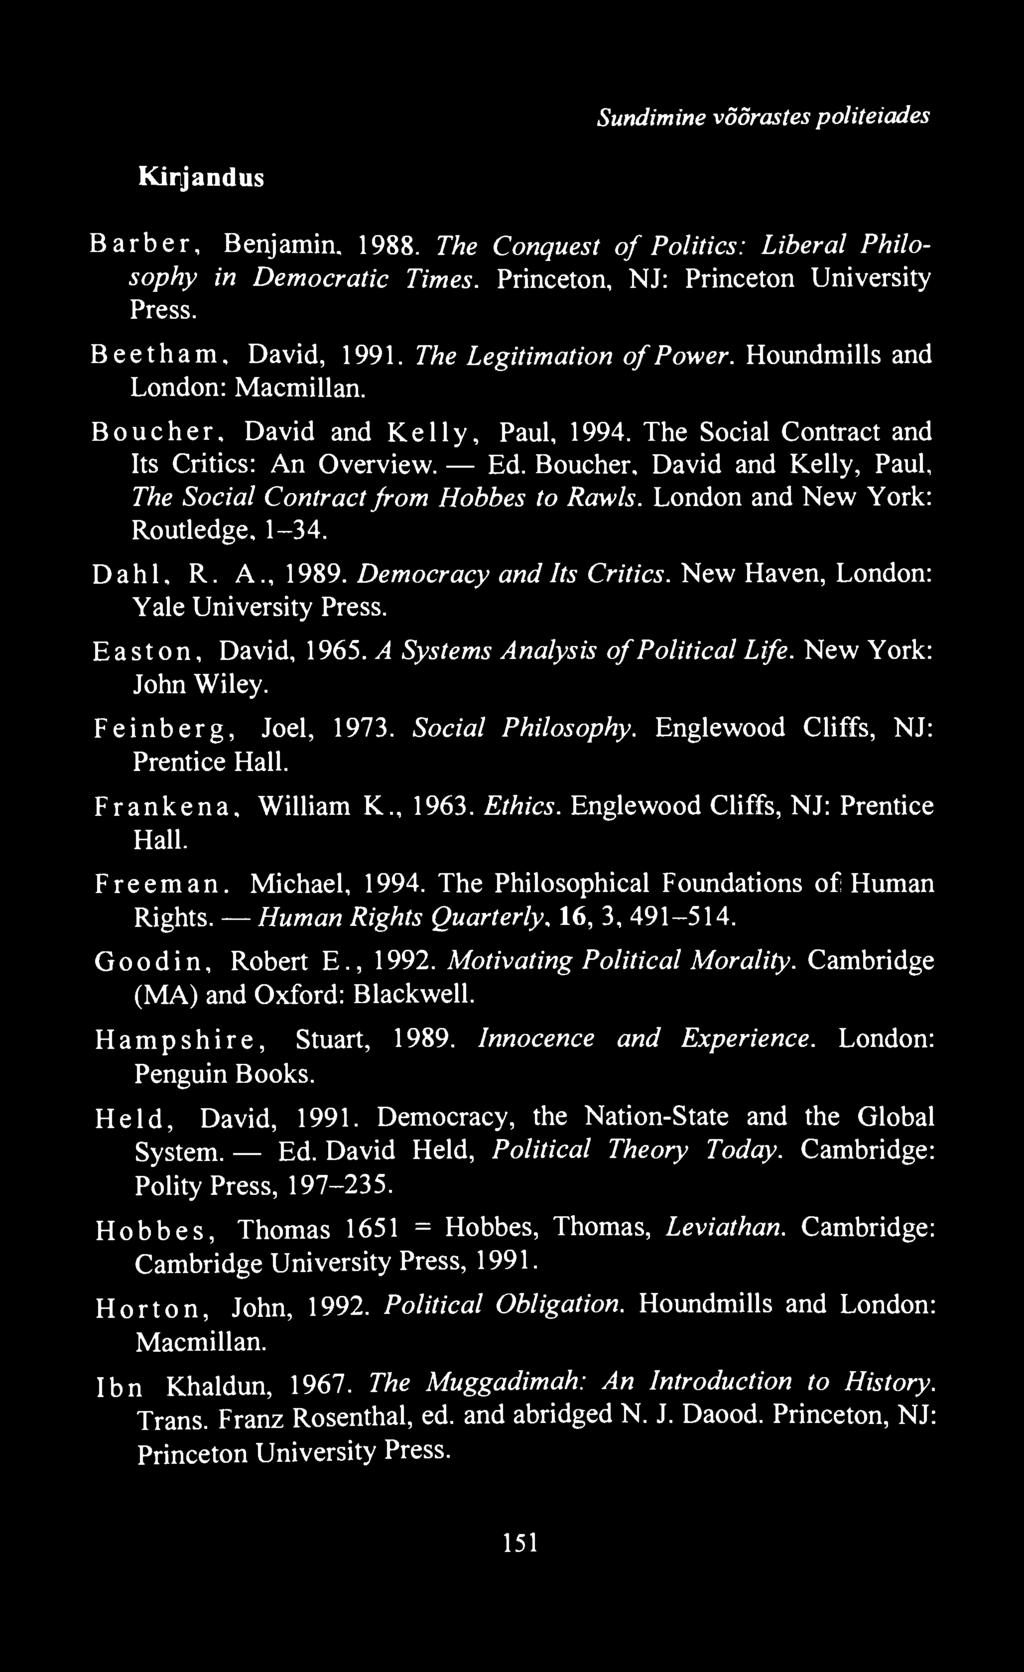 Boucher, David and Kelly, Paul, The Social Contract from Hobbes to Rawls. London and New York: Routledge, 1-34. Dahl, R. A., 1989. Democracy and Its Critics. New Haven, London: Yale University Press.